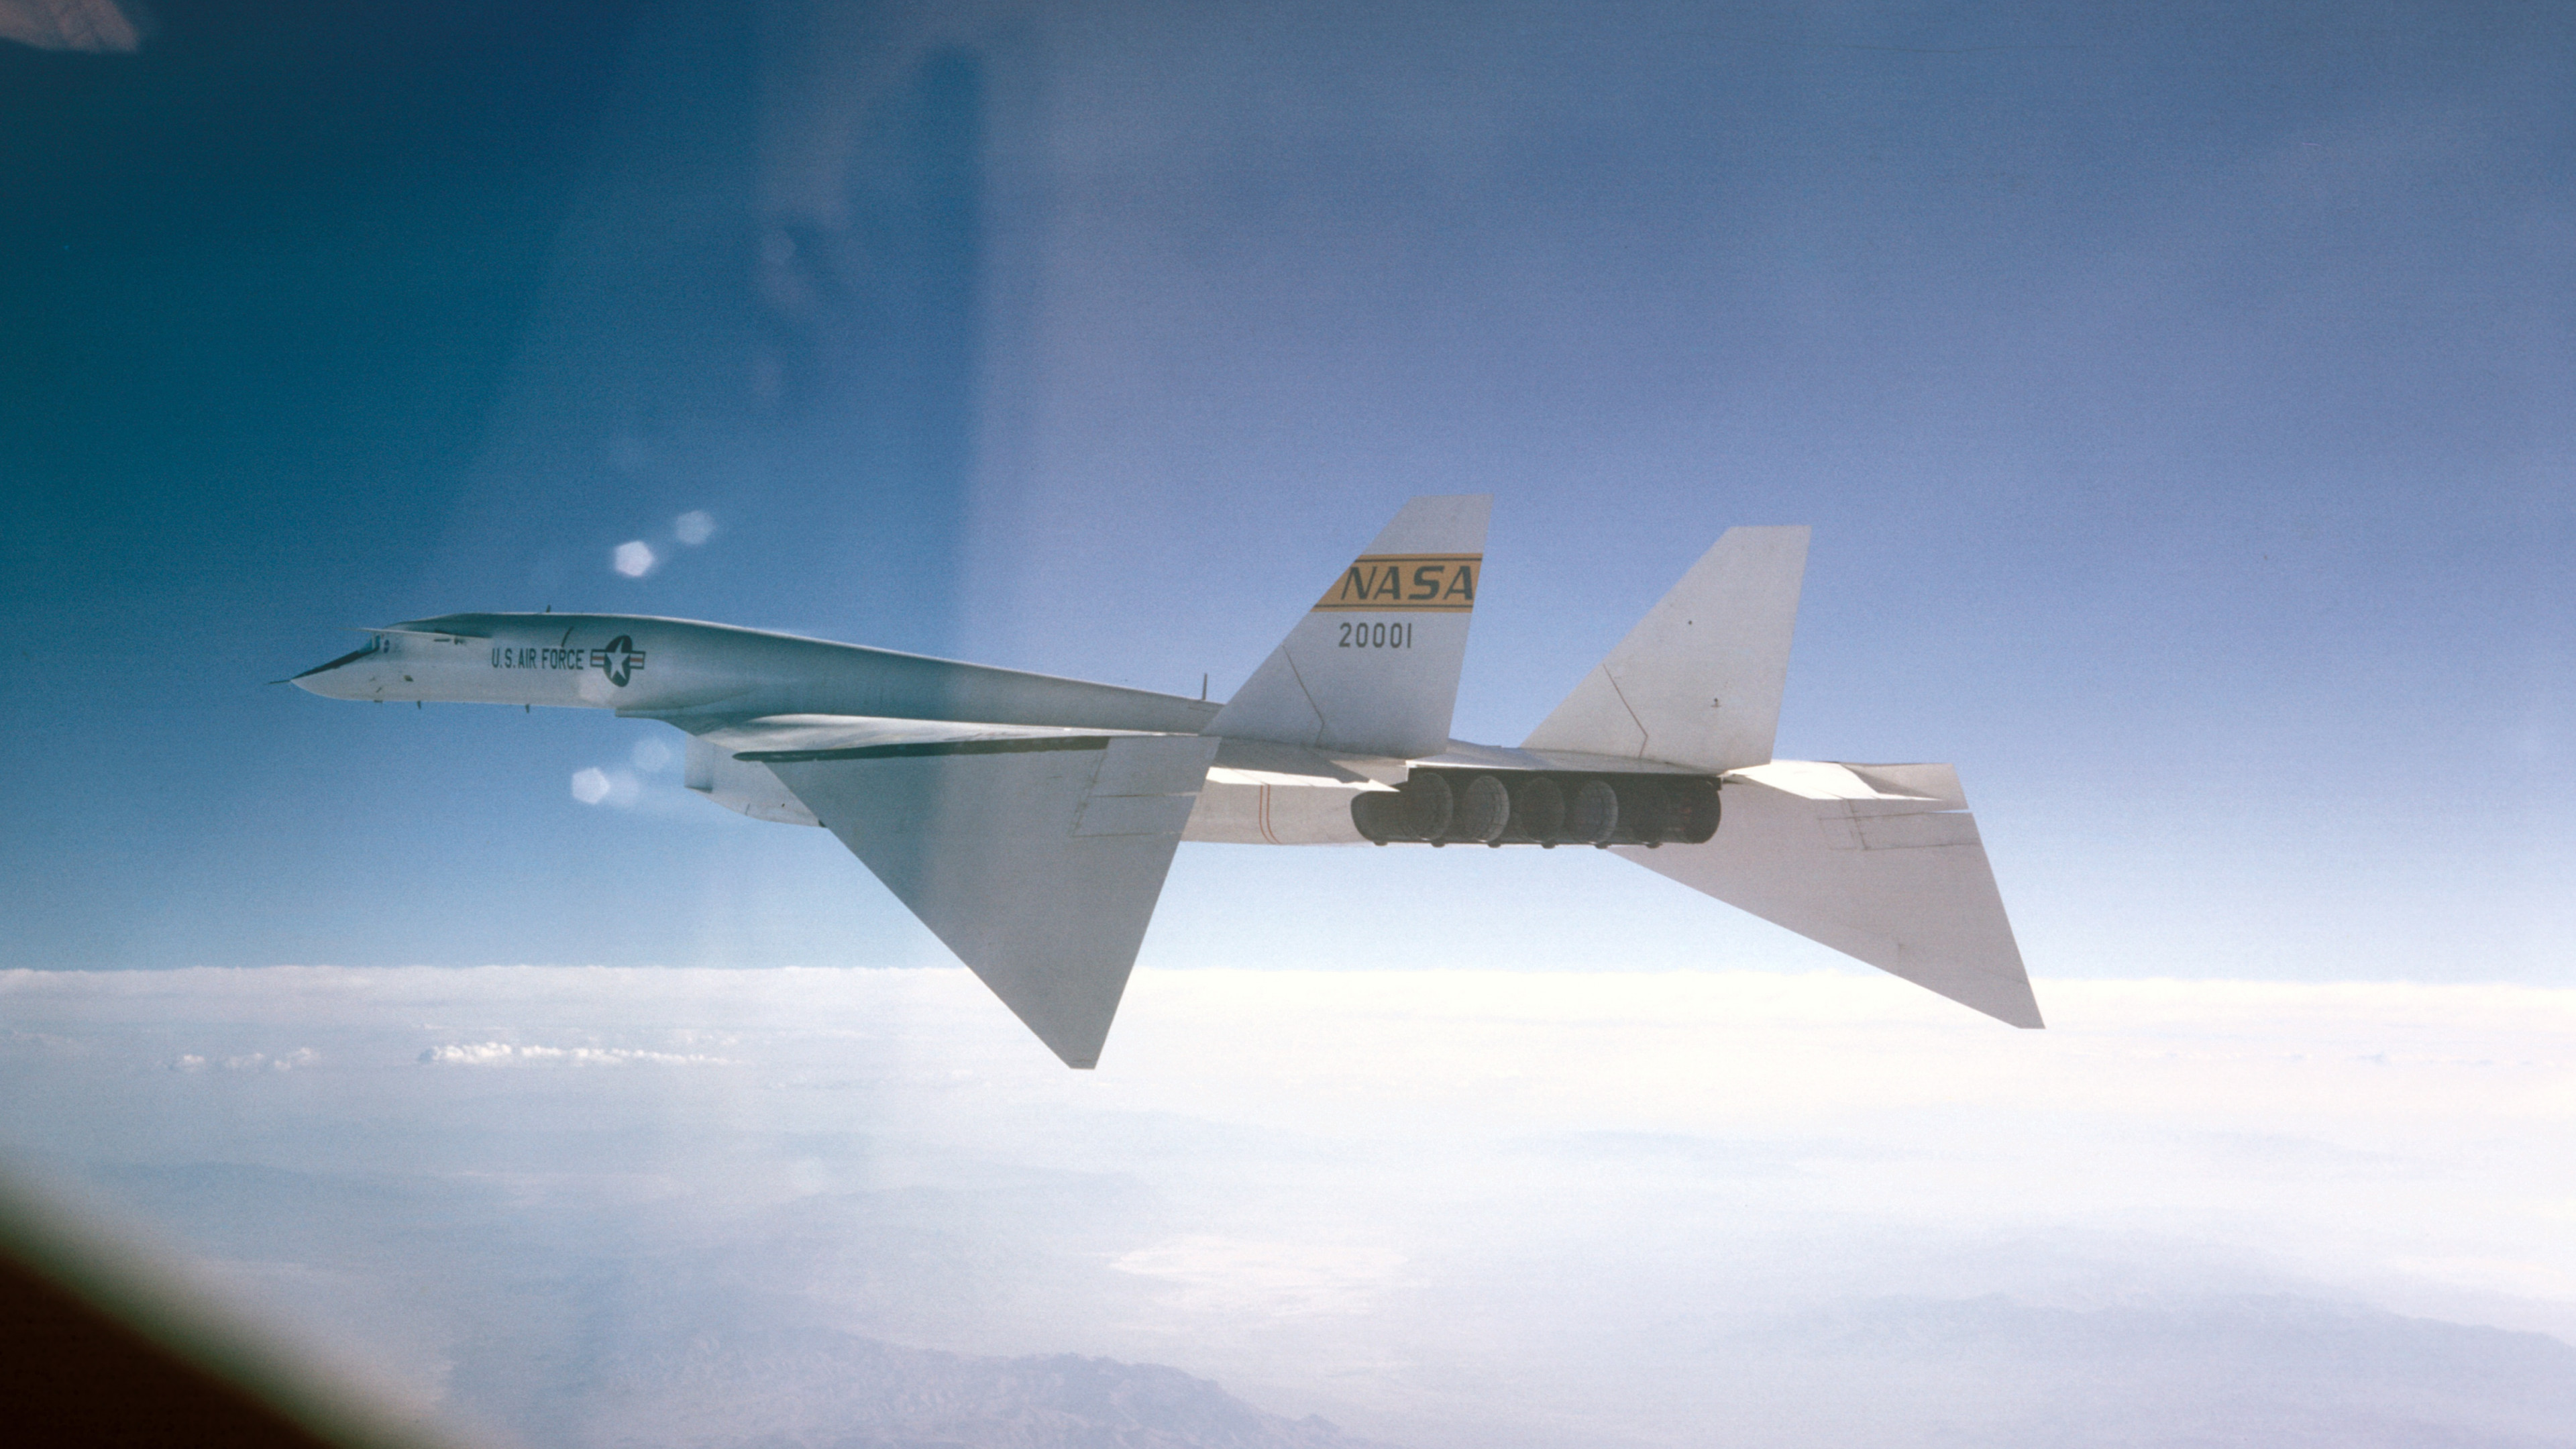 Wallpaper North American XB-70 Valkyrie, fighter aircraft, U.S. Air Force, Military #122473840 x 2160